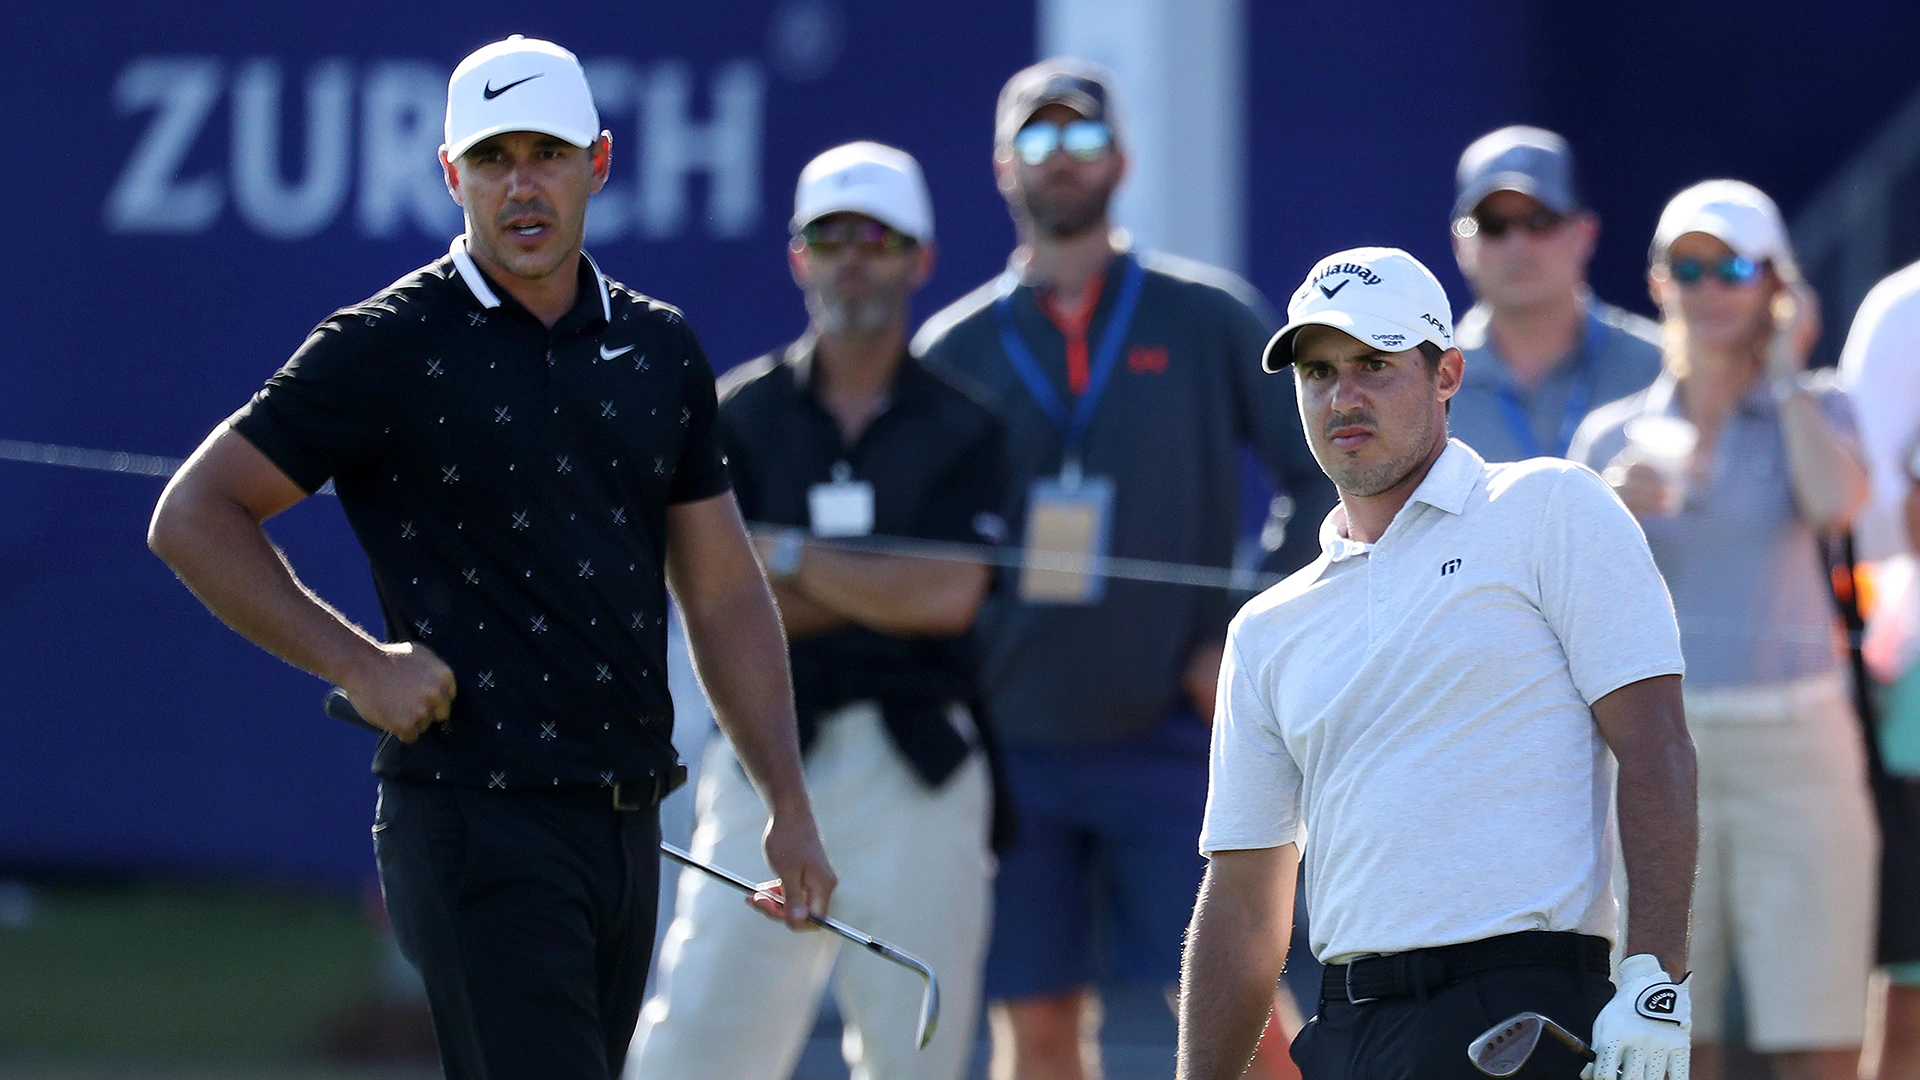 Chase Koepka Monday qualifies for Travelers Championship with Brooks watching